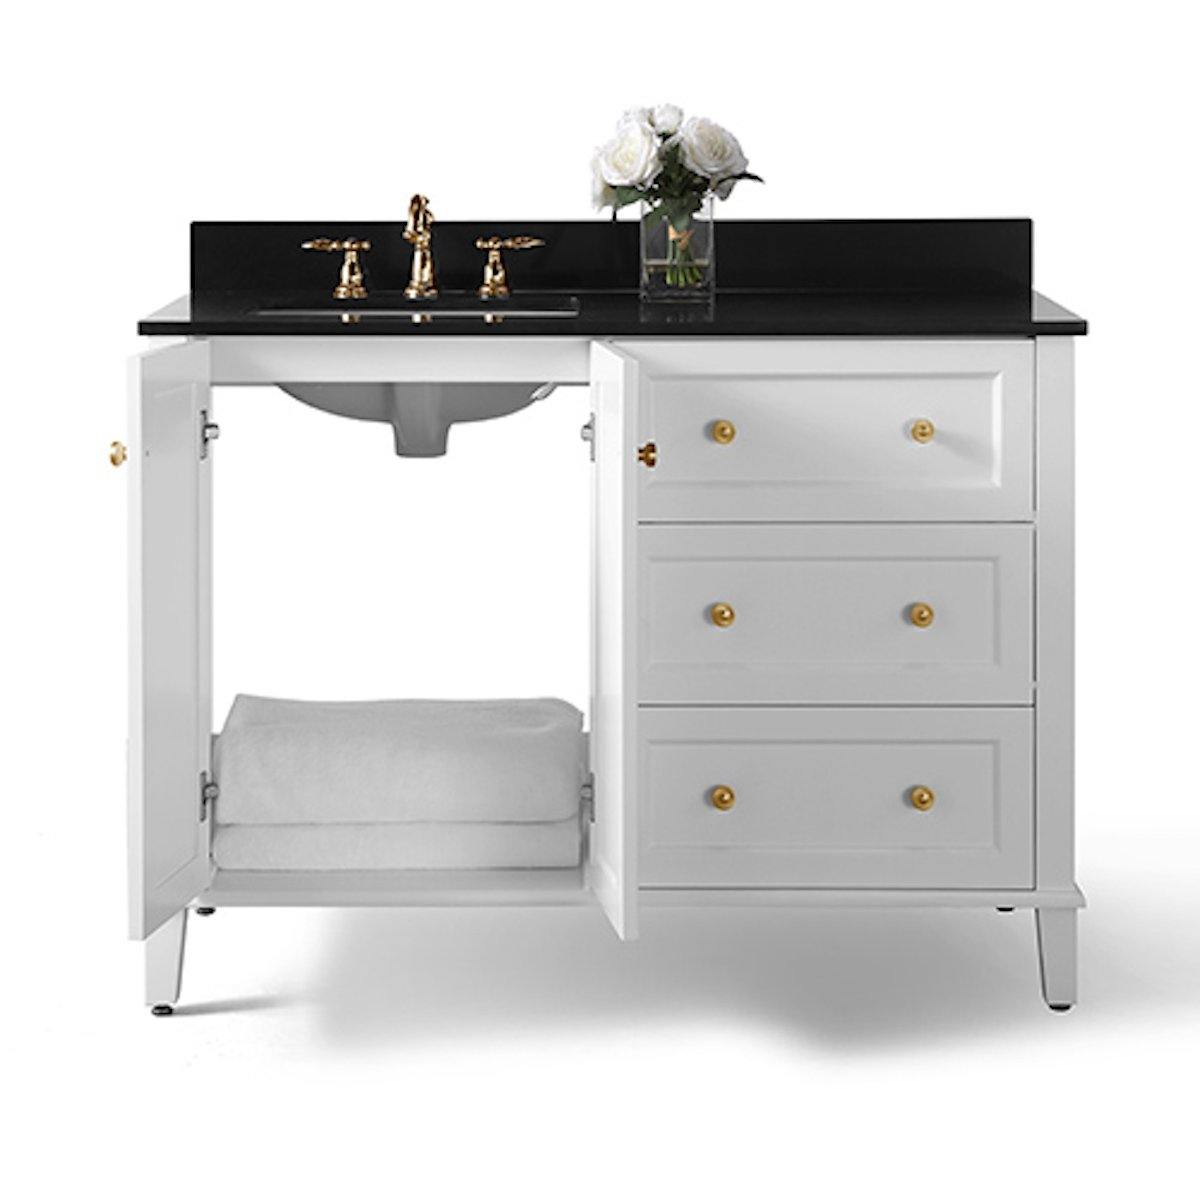 Ancerre Designs Hannah 48 Inch White Single Vanity with Left Basin and Gold Hardware Open Cabinet